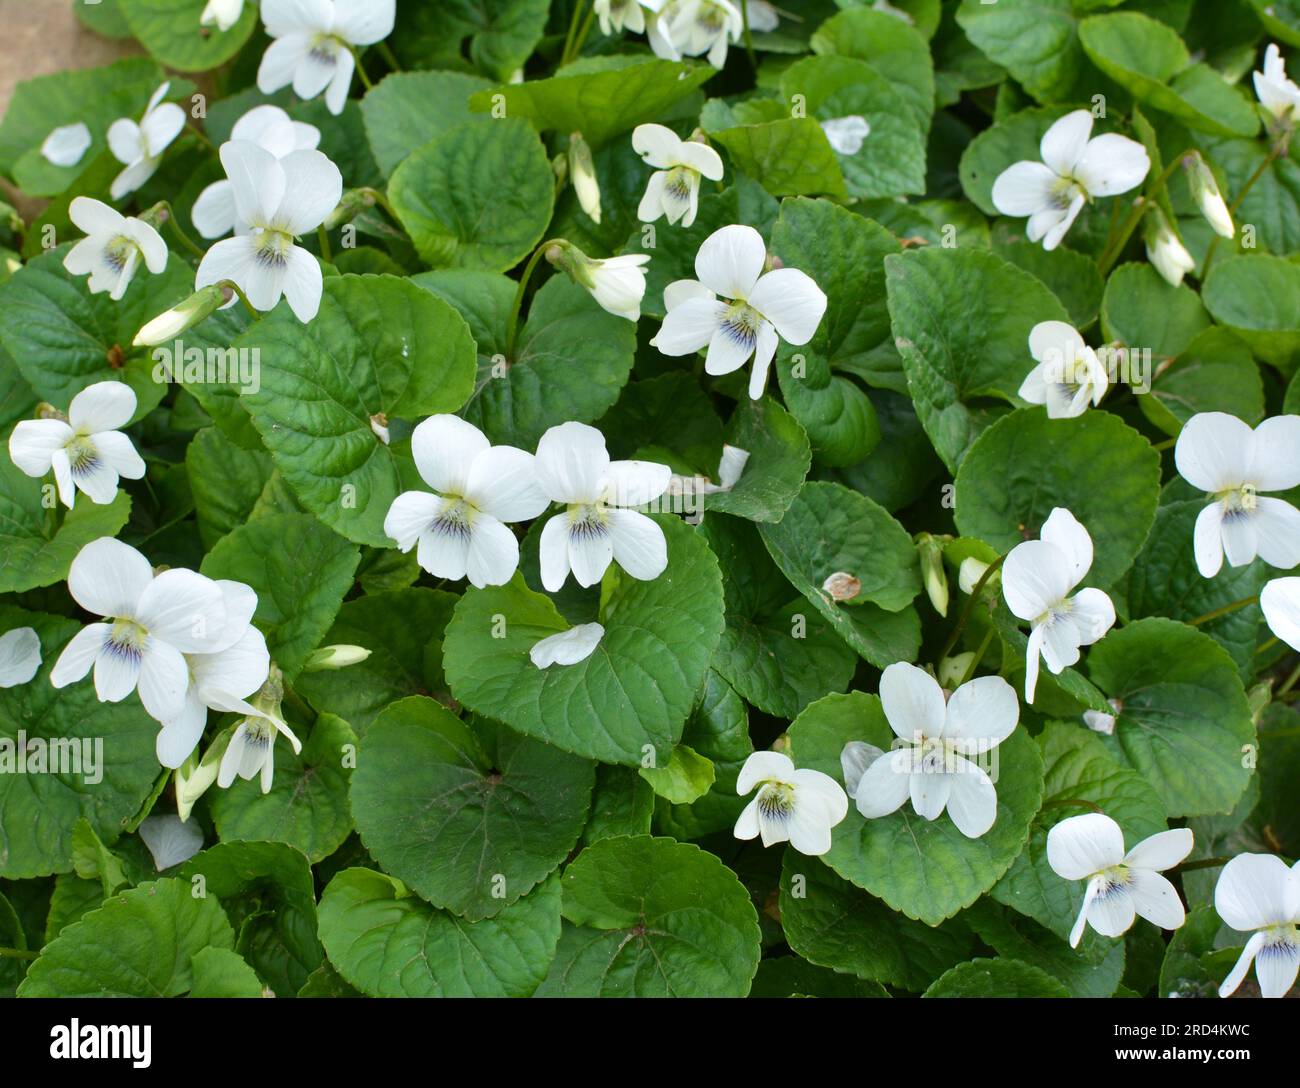 In spring, white violets bloom on the flower bed Stock Photo